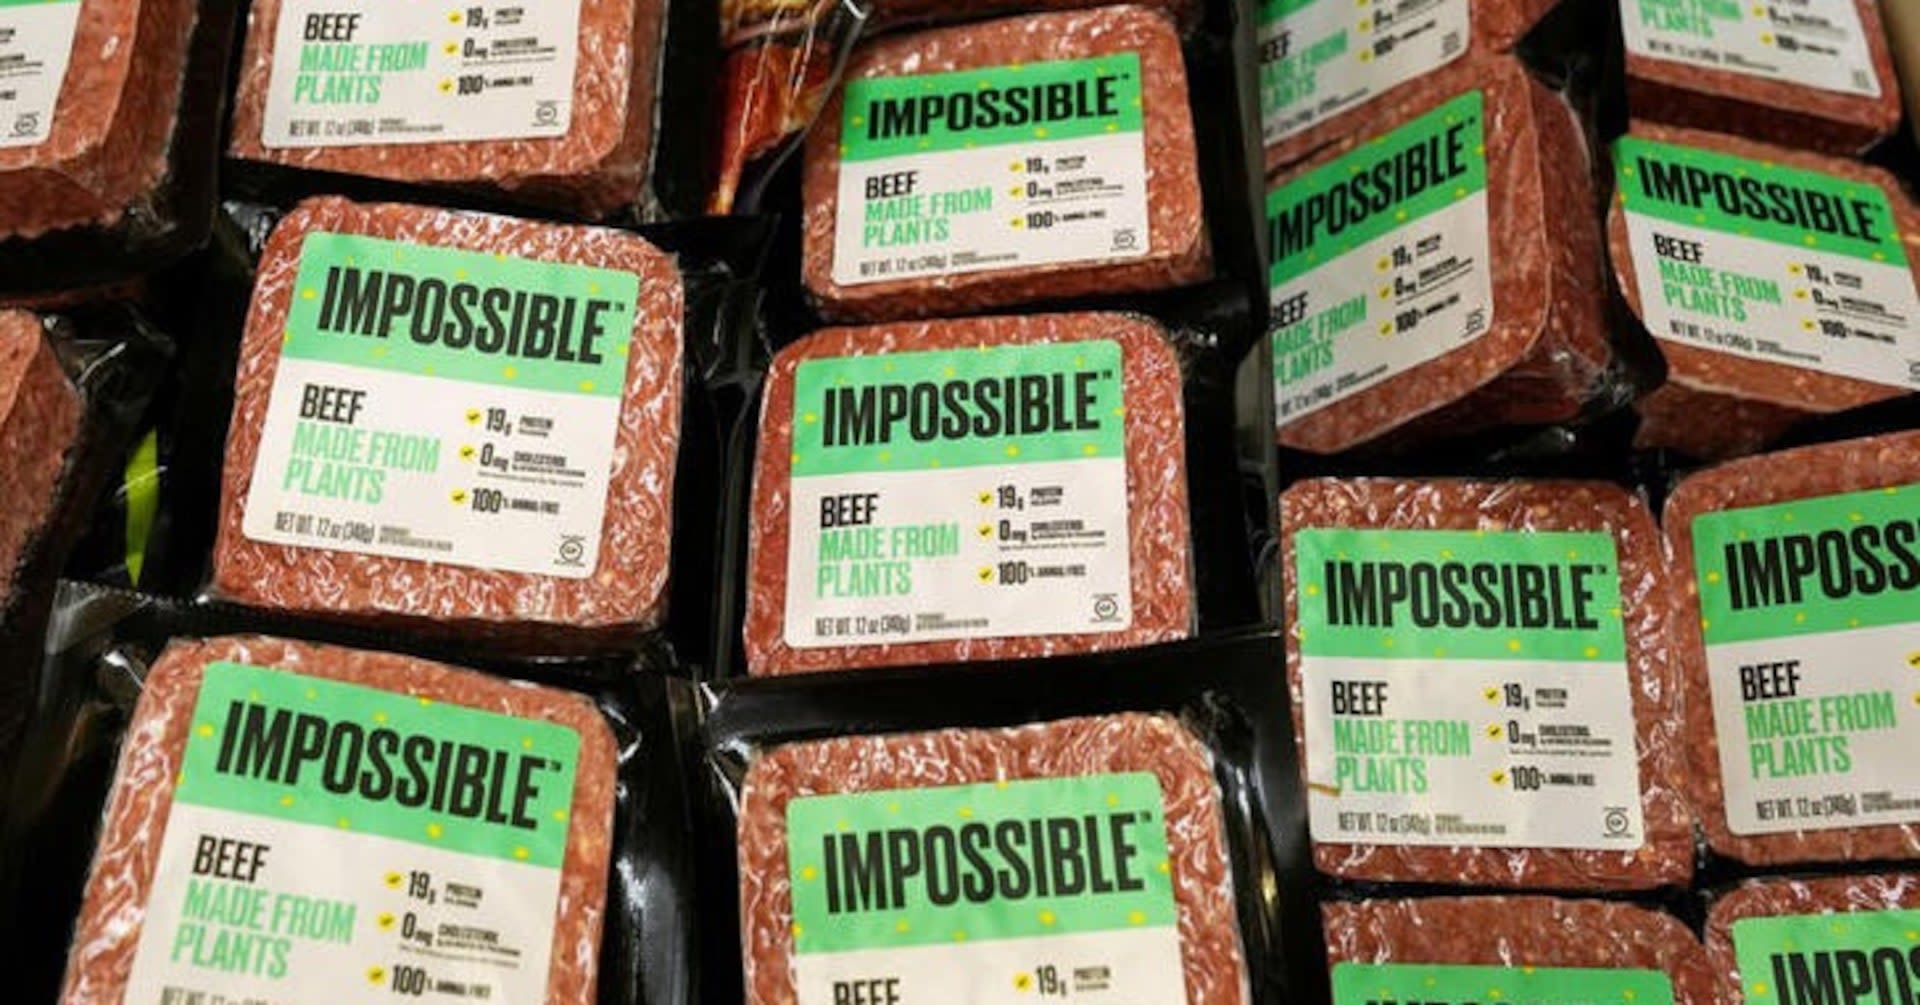 US Supreme Court declines appeal in Impossible Foods trademark fight